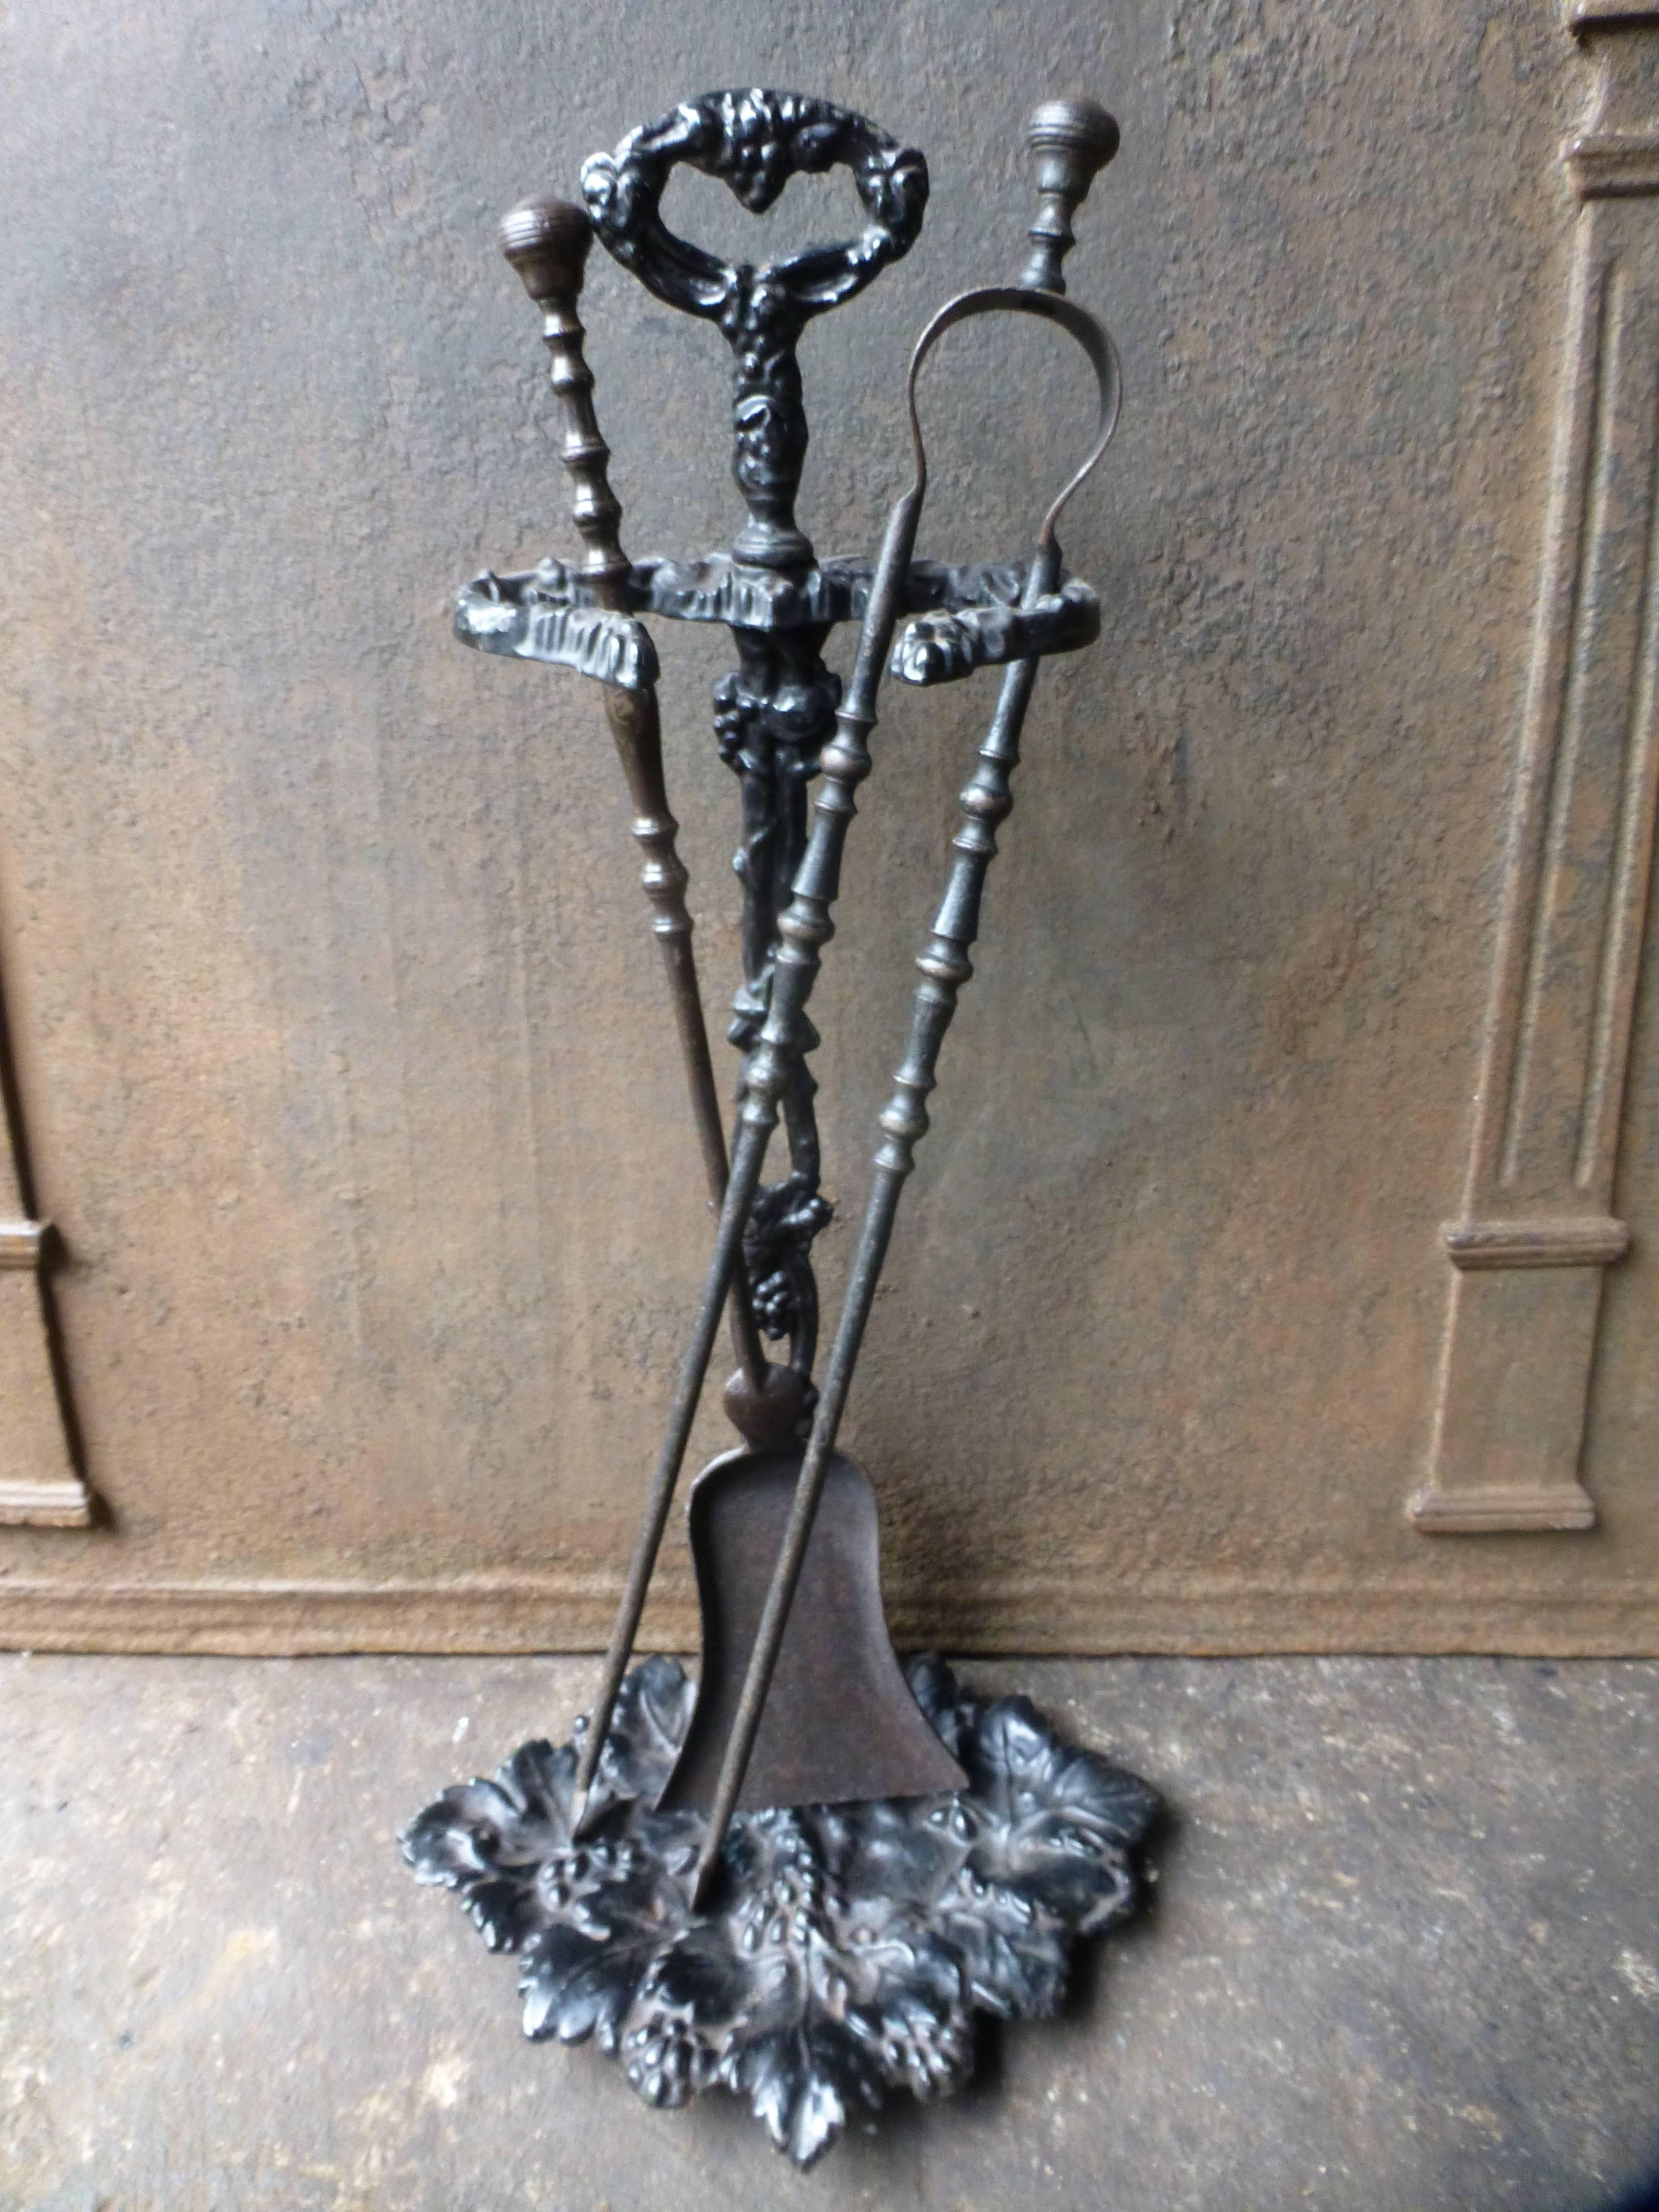 19th century French fire tools or fire irons, made of wrought iron (tools) and cast iron (stand).